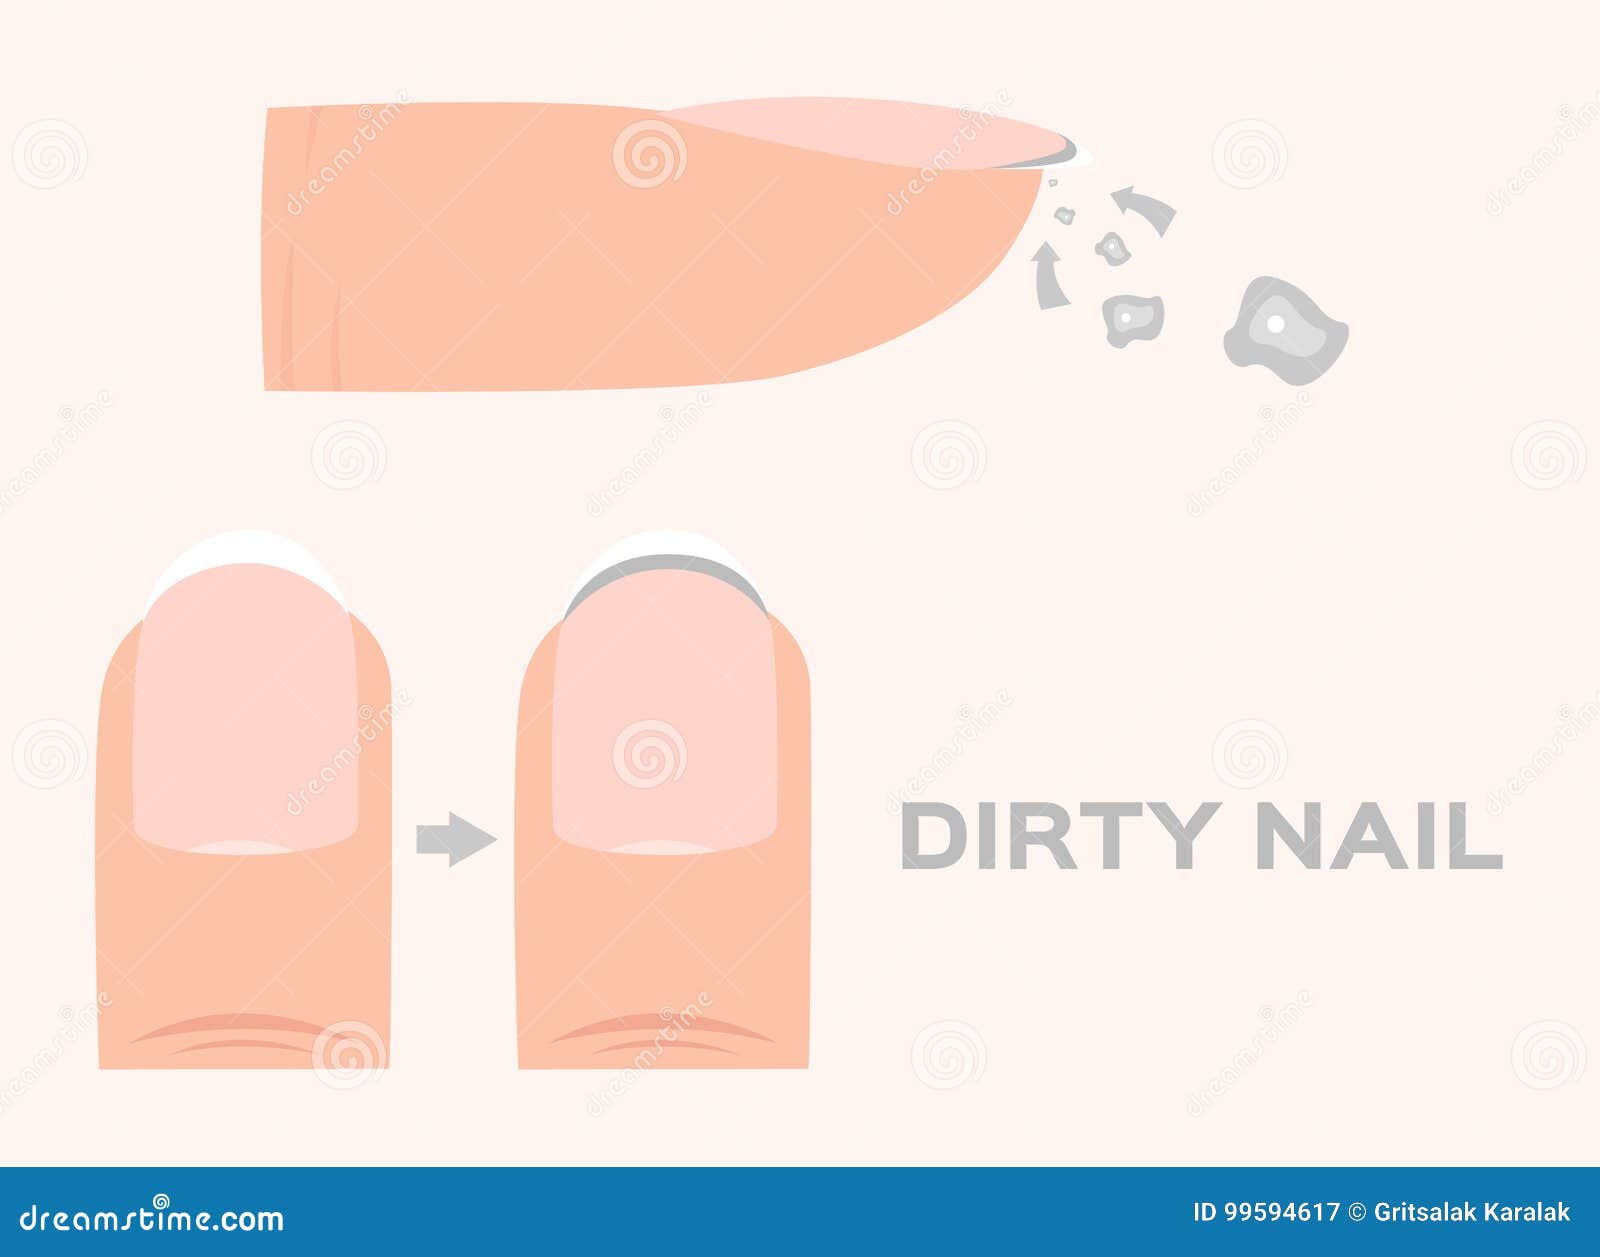 structure of a dirty finger nail . human . anatomy